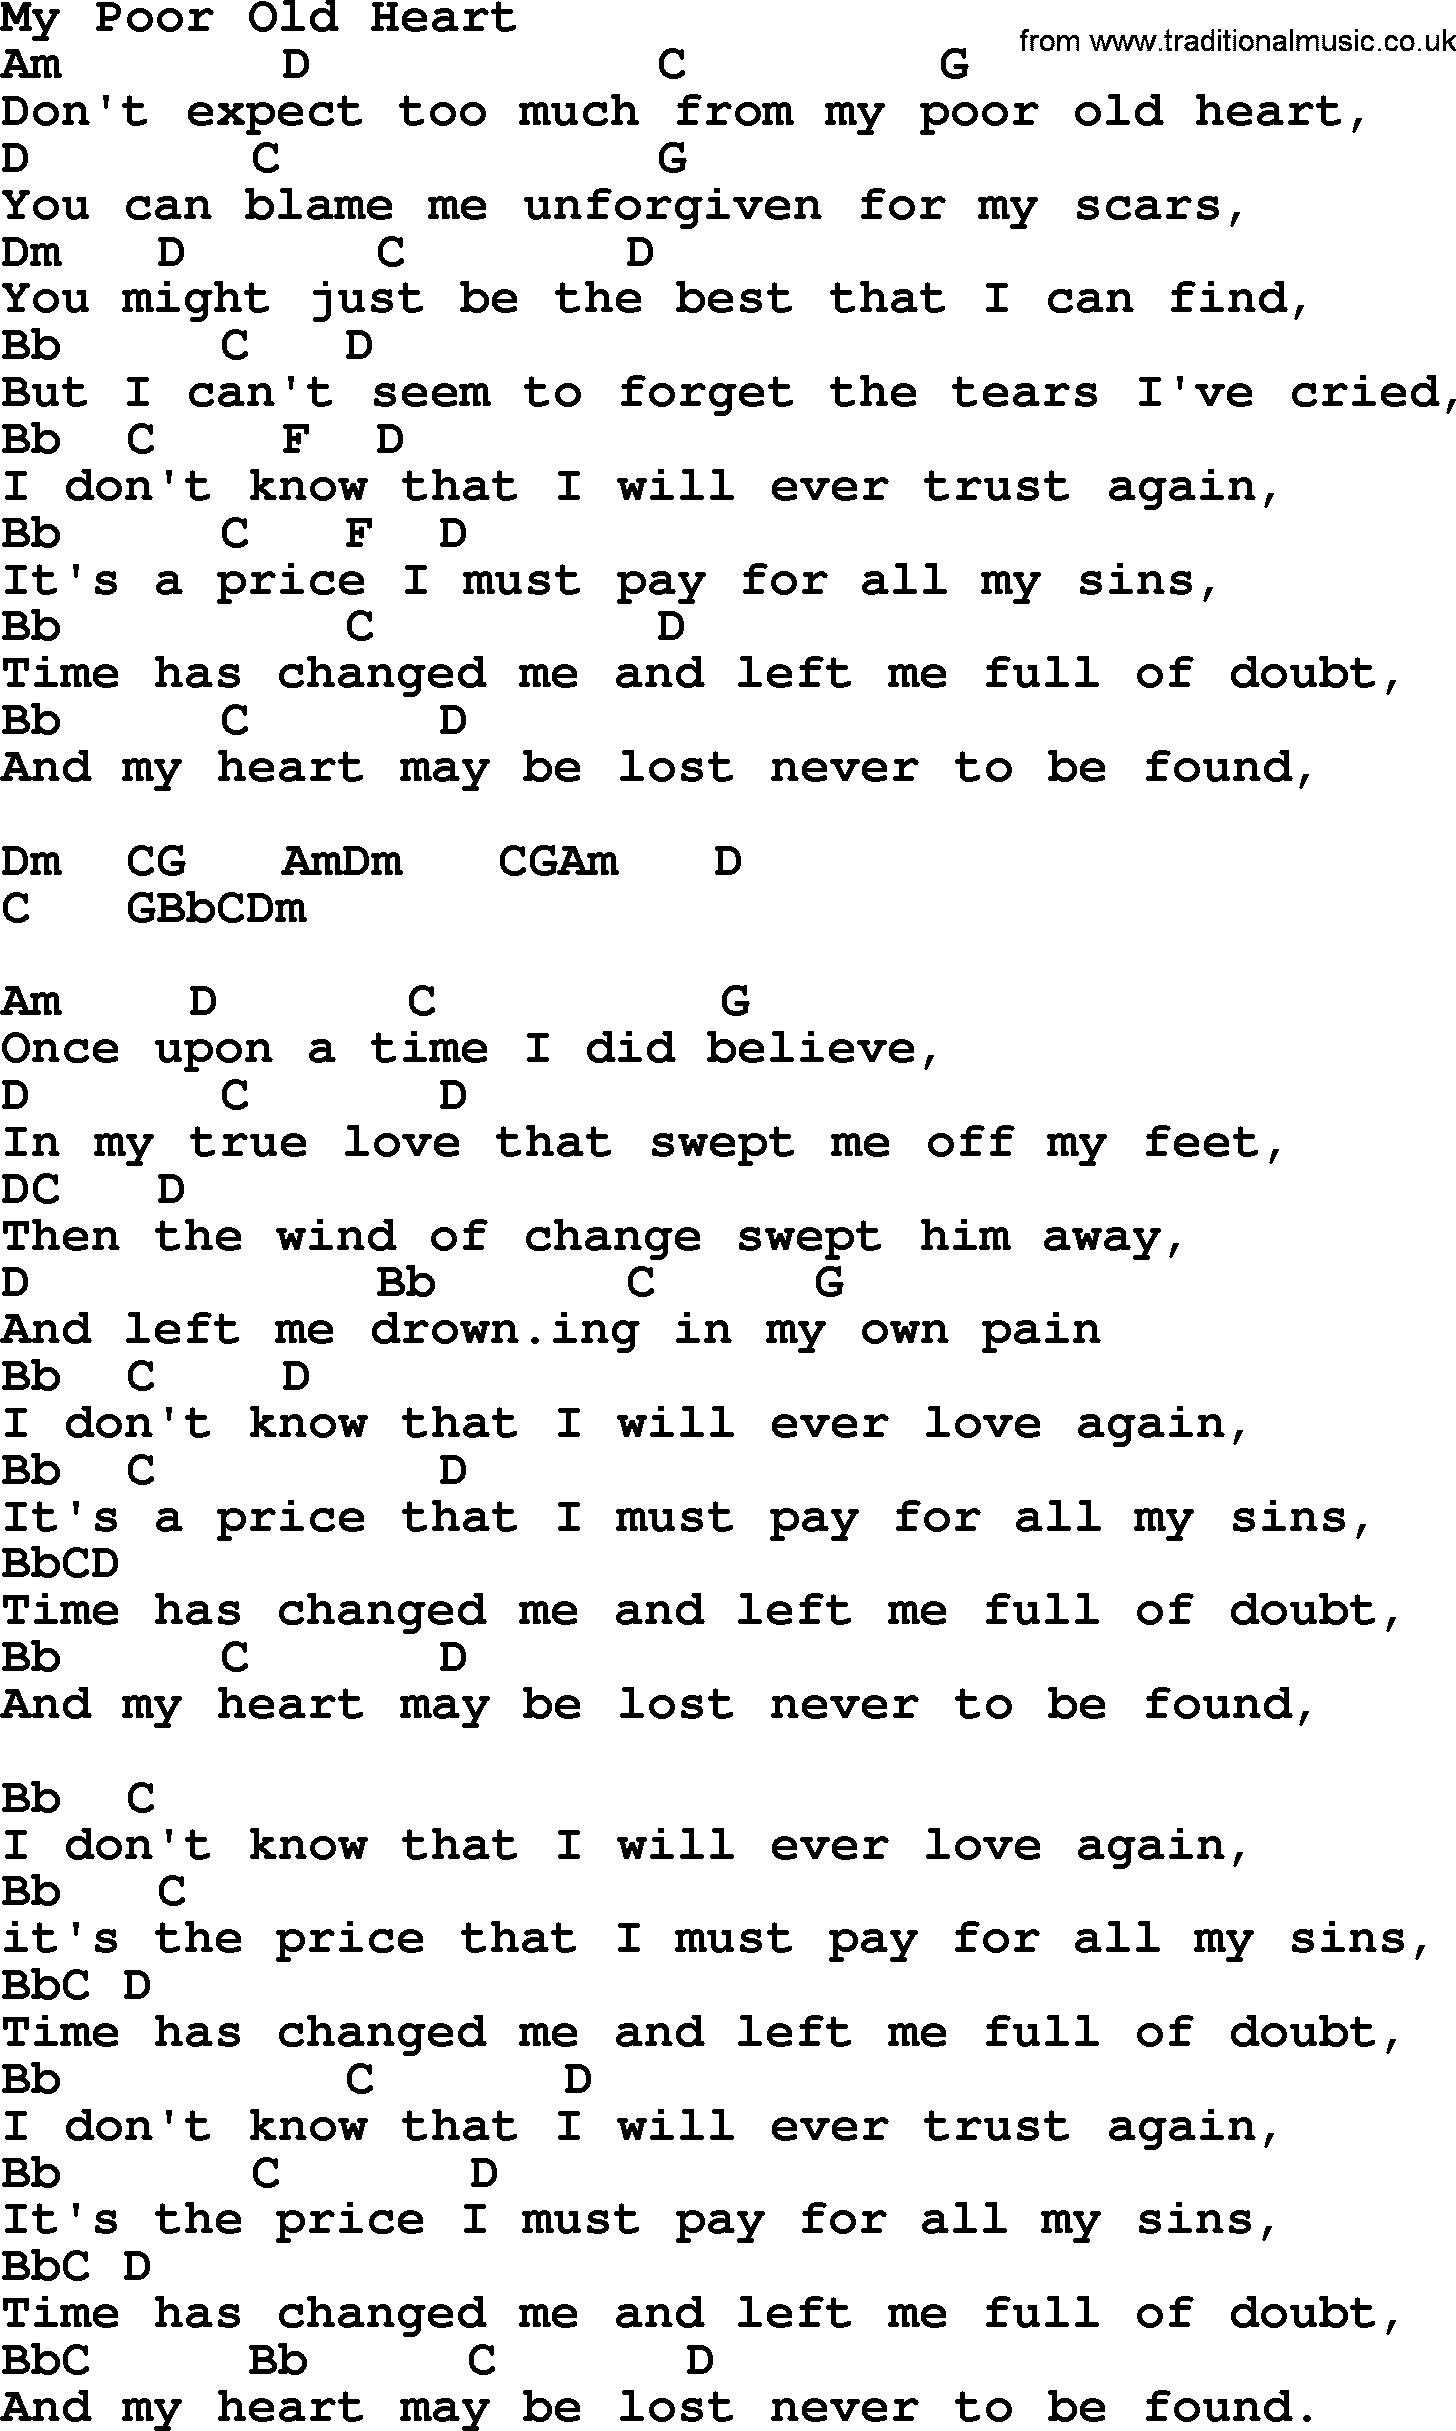 Bluegrass song: My Poor Old Heart, lyrics and chords